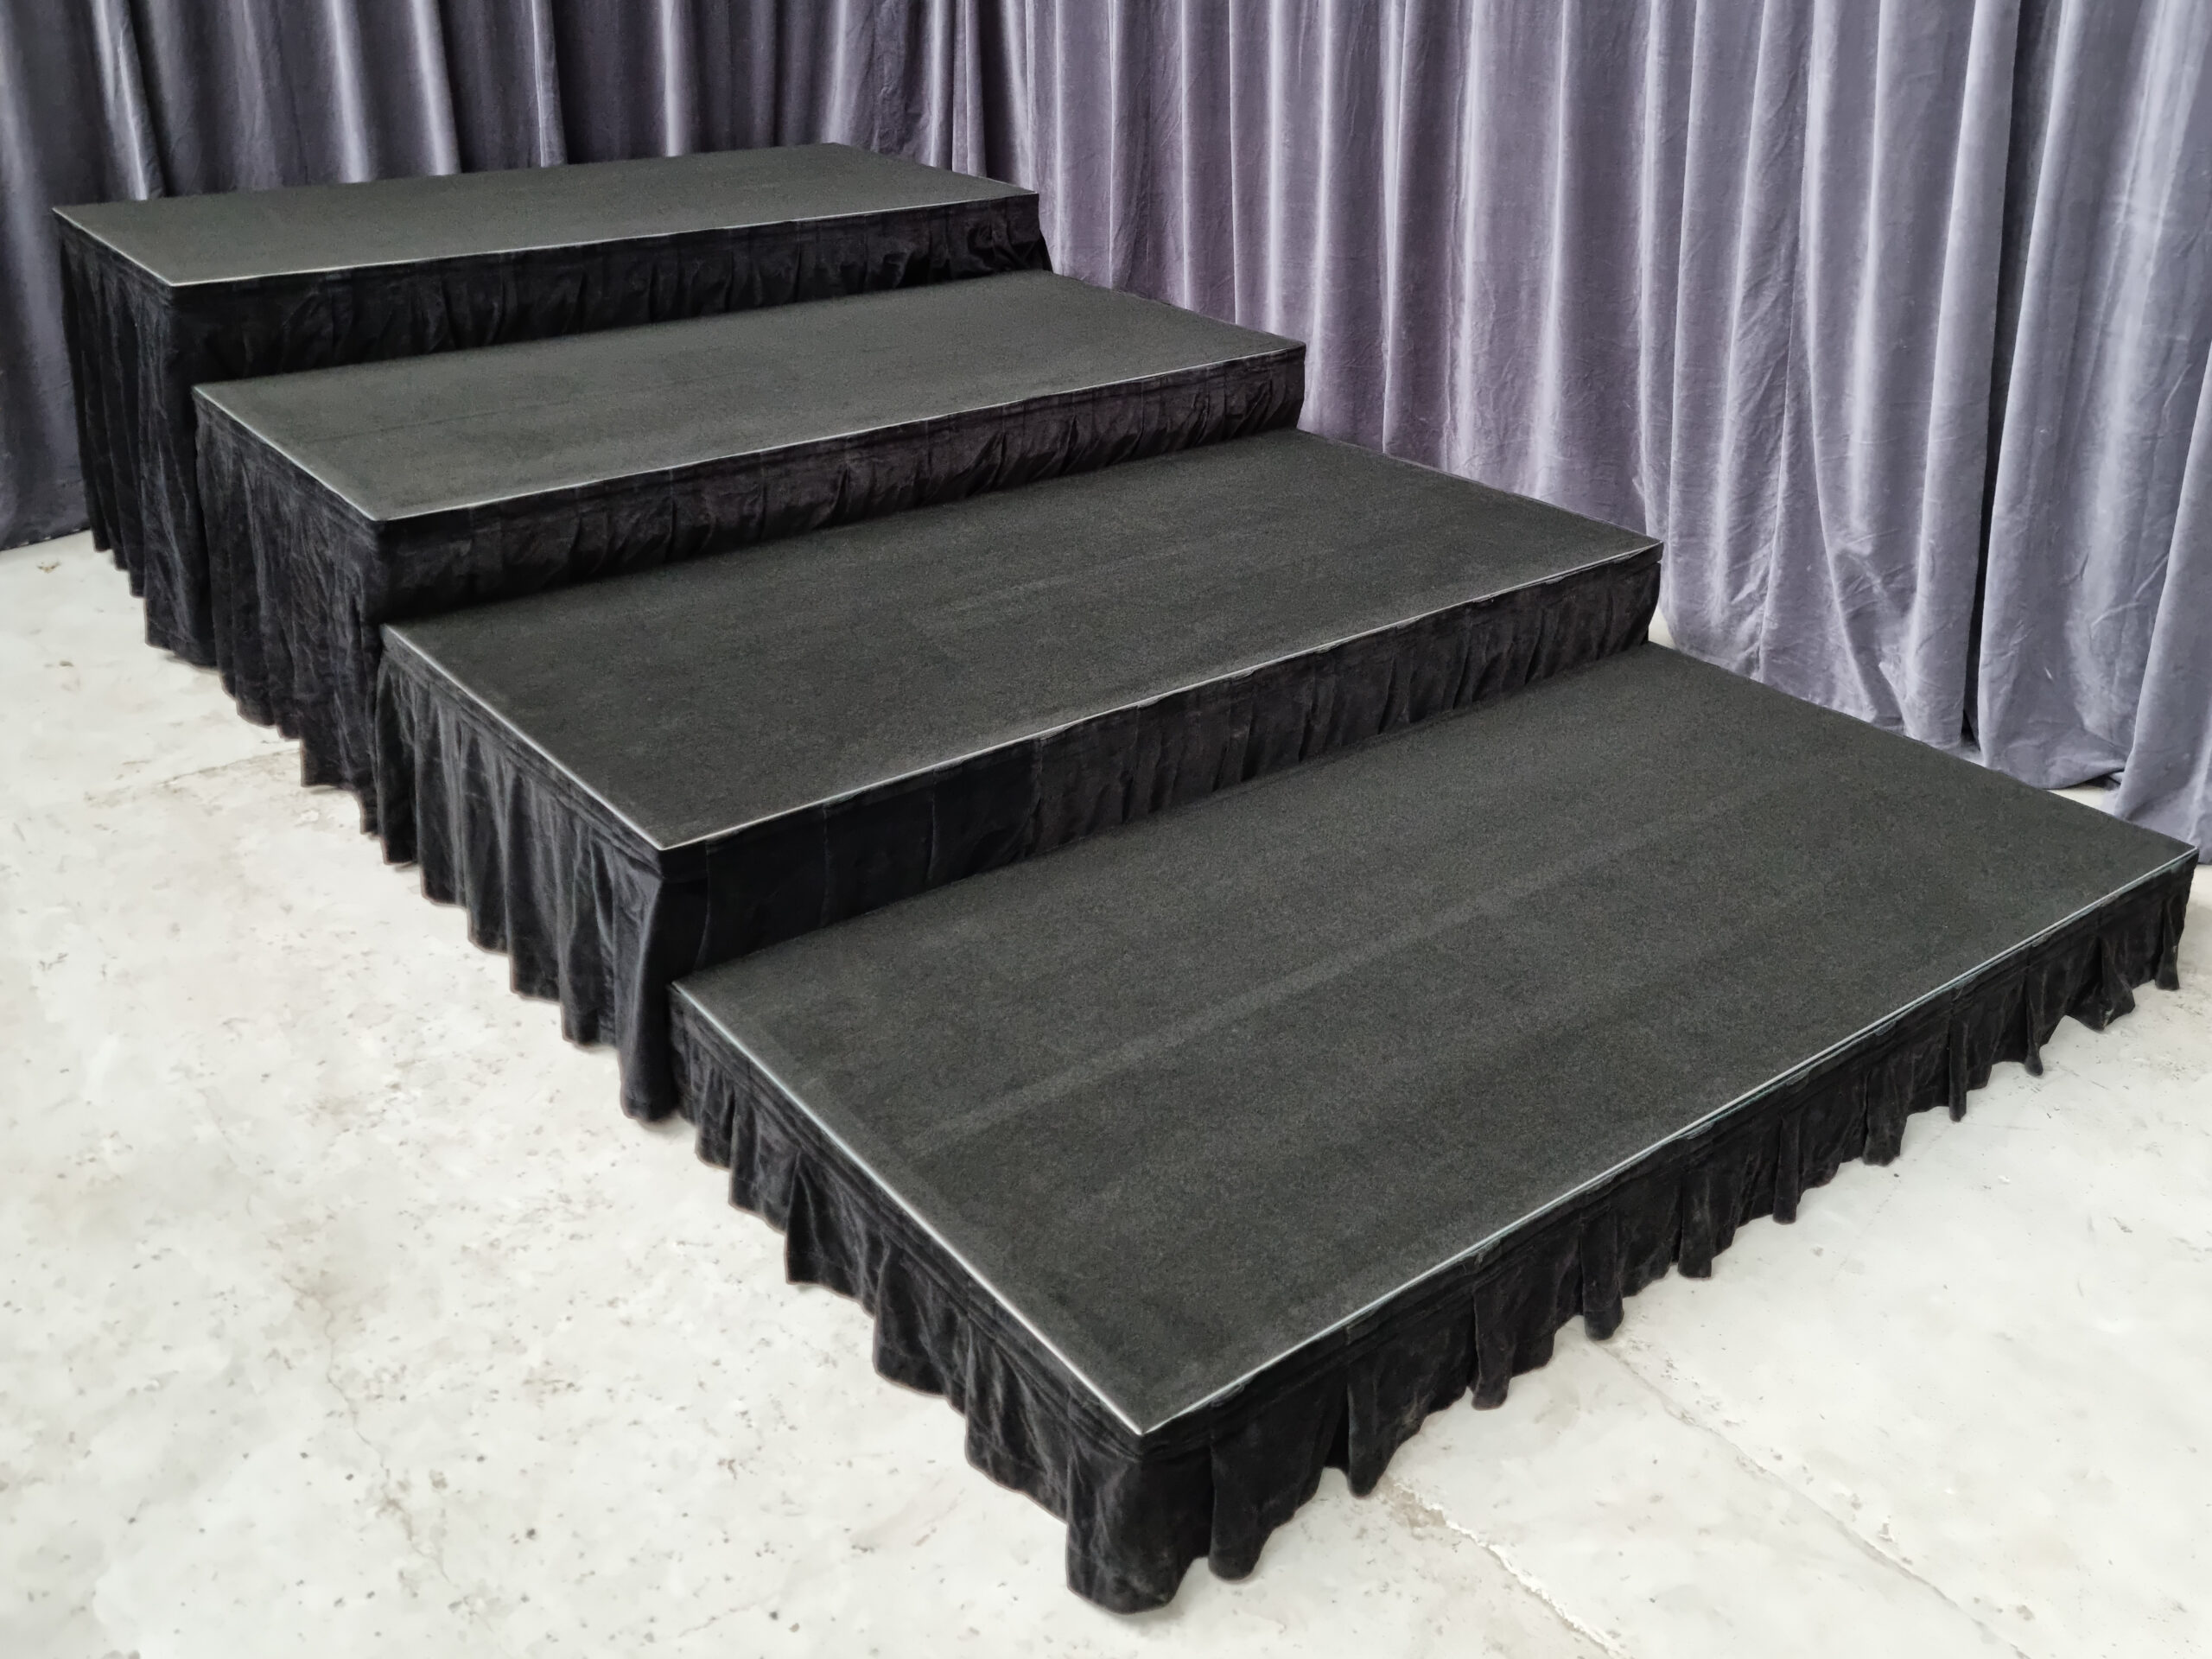 Tiered aluminium stage with skirting